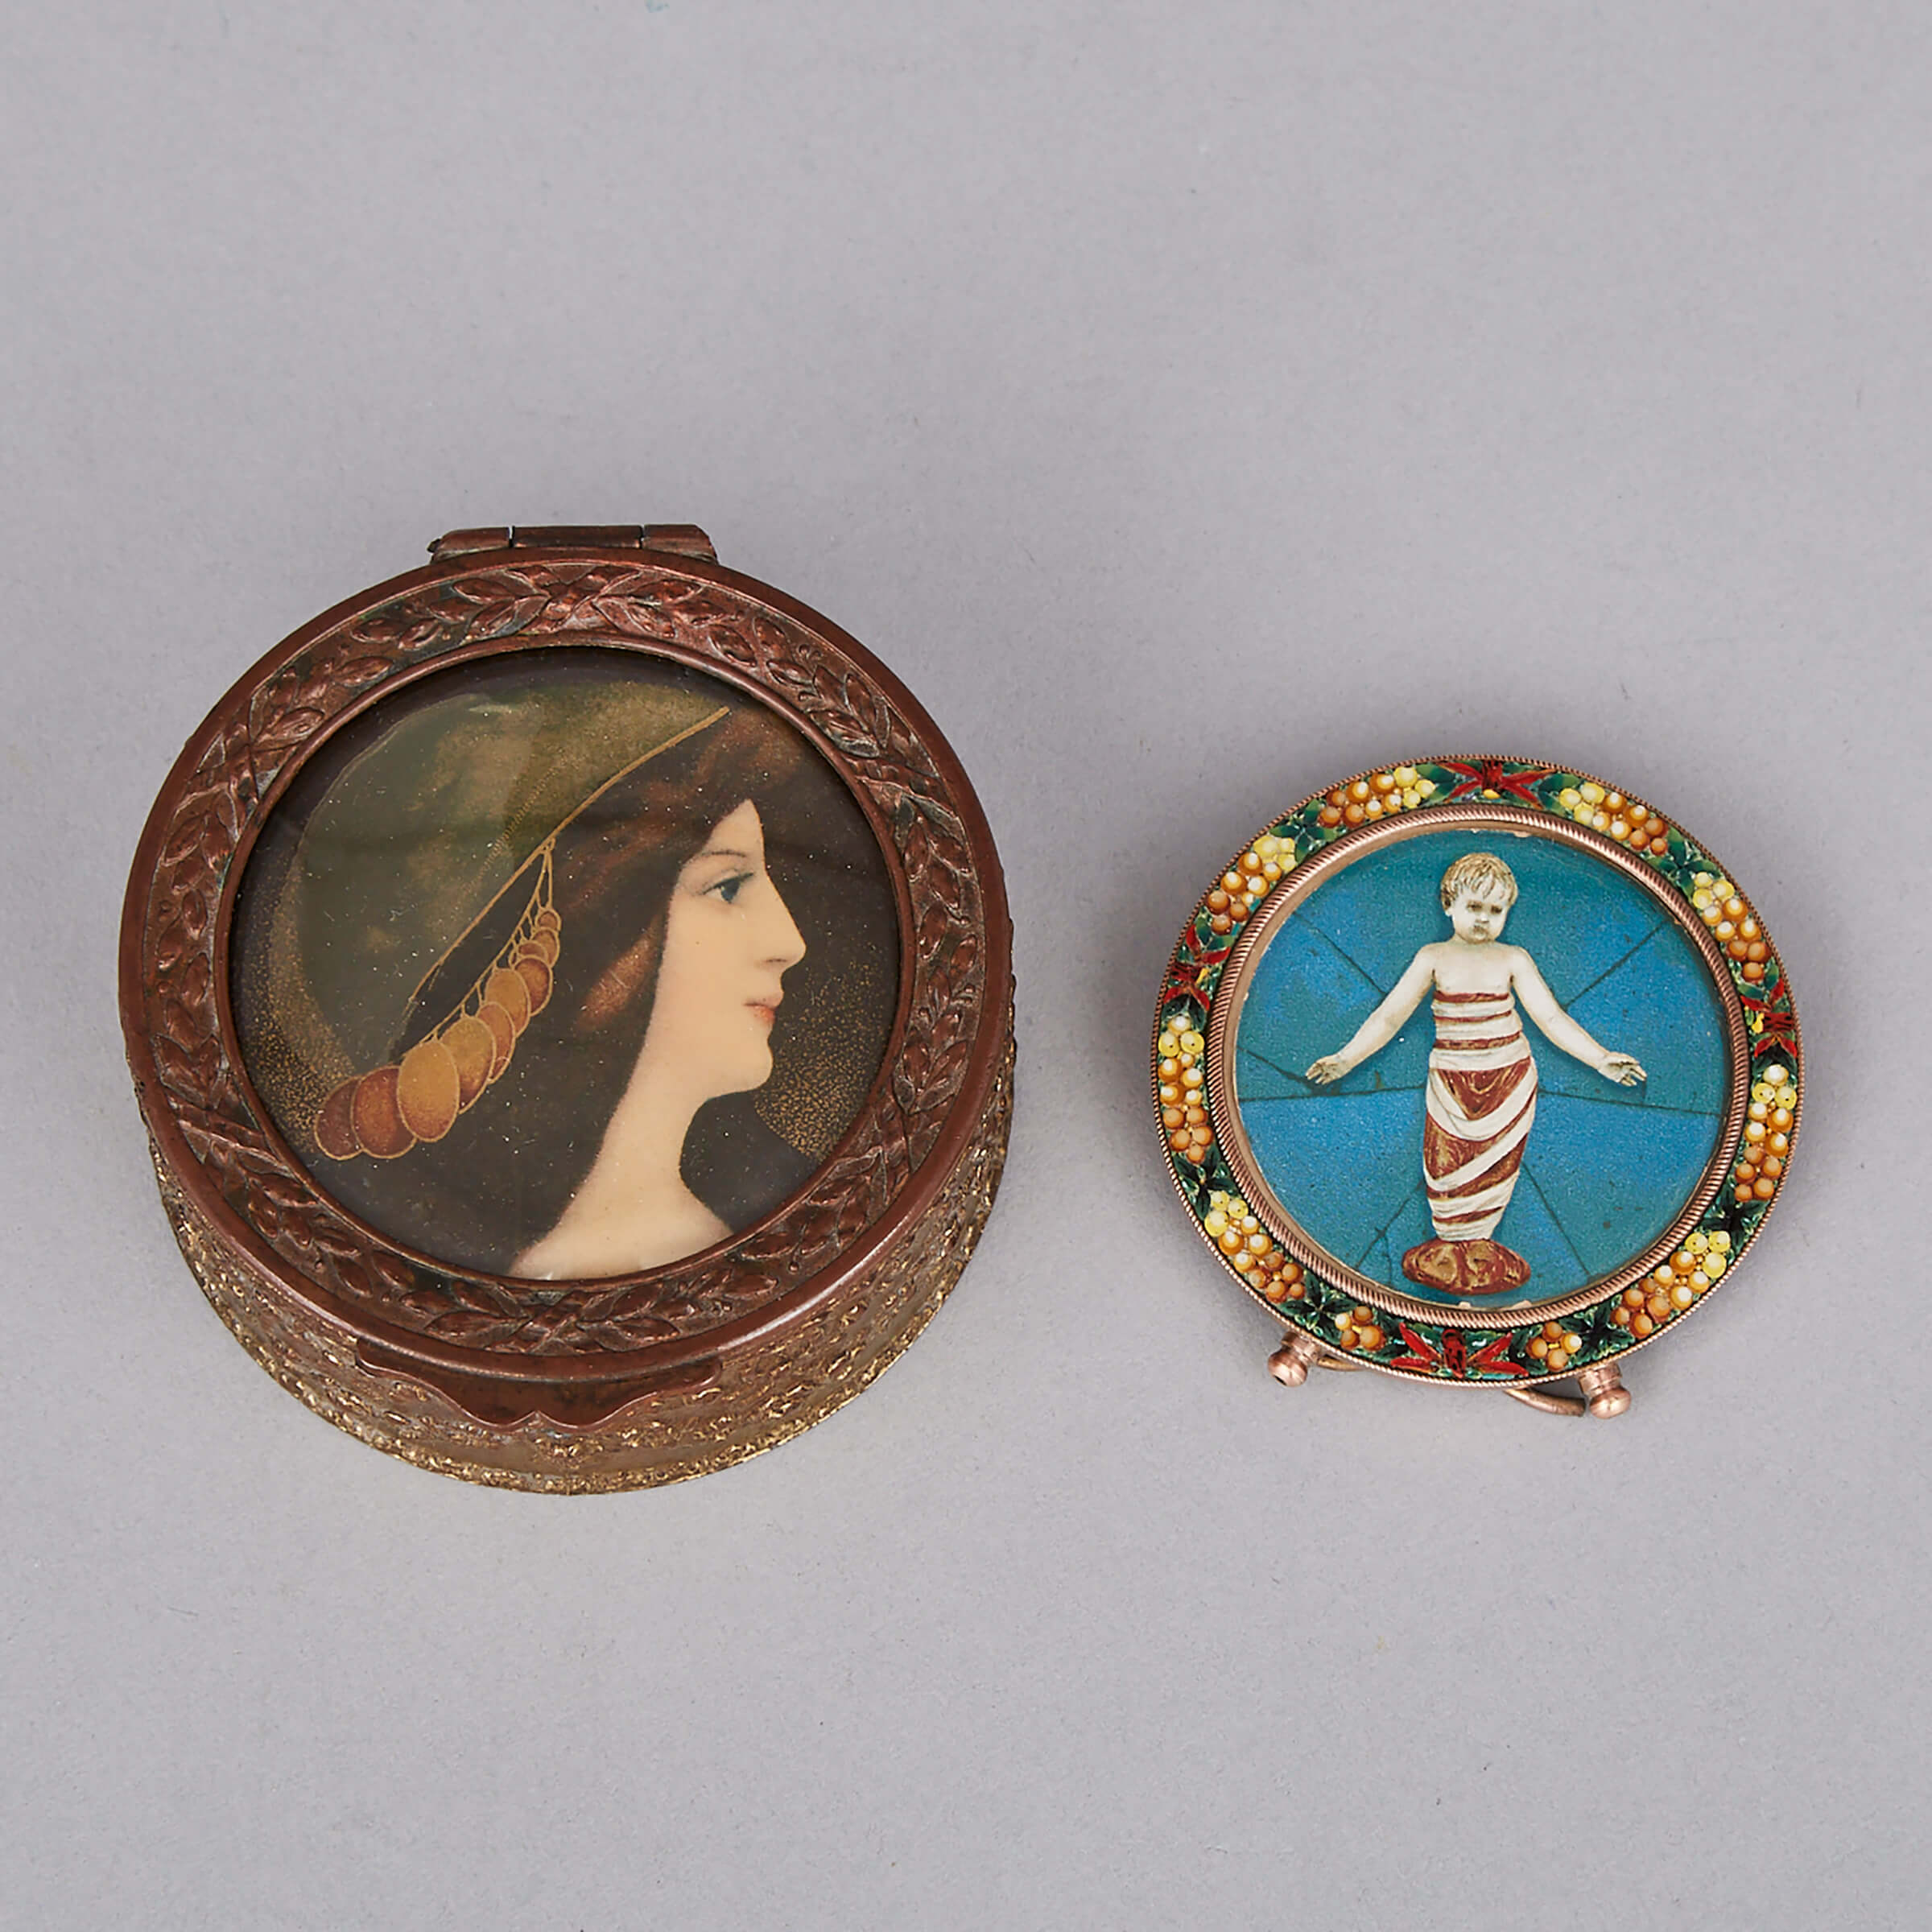 A Small Italian Micromosaic Frame and a Dresser Box, 20th century